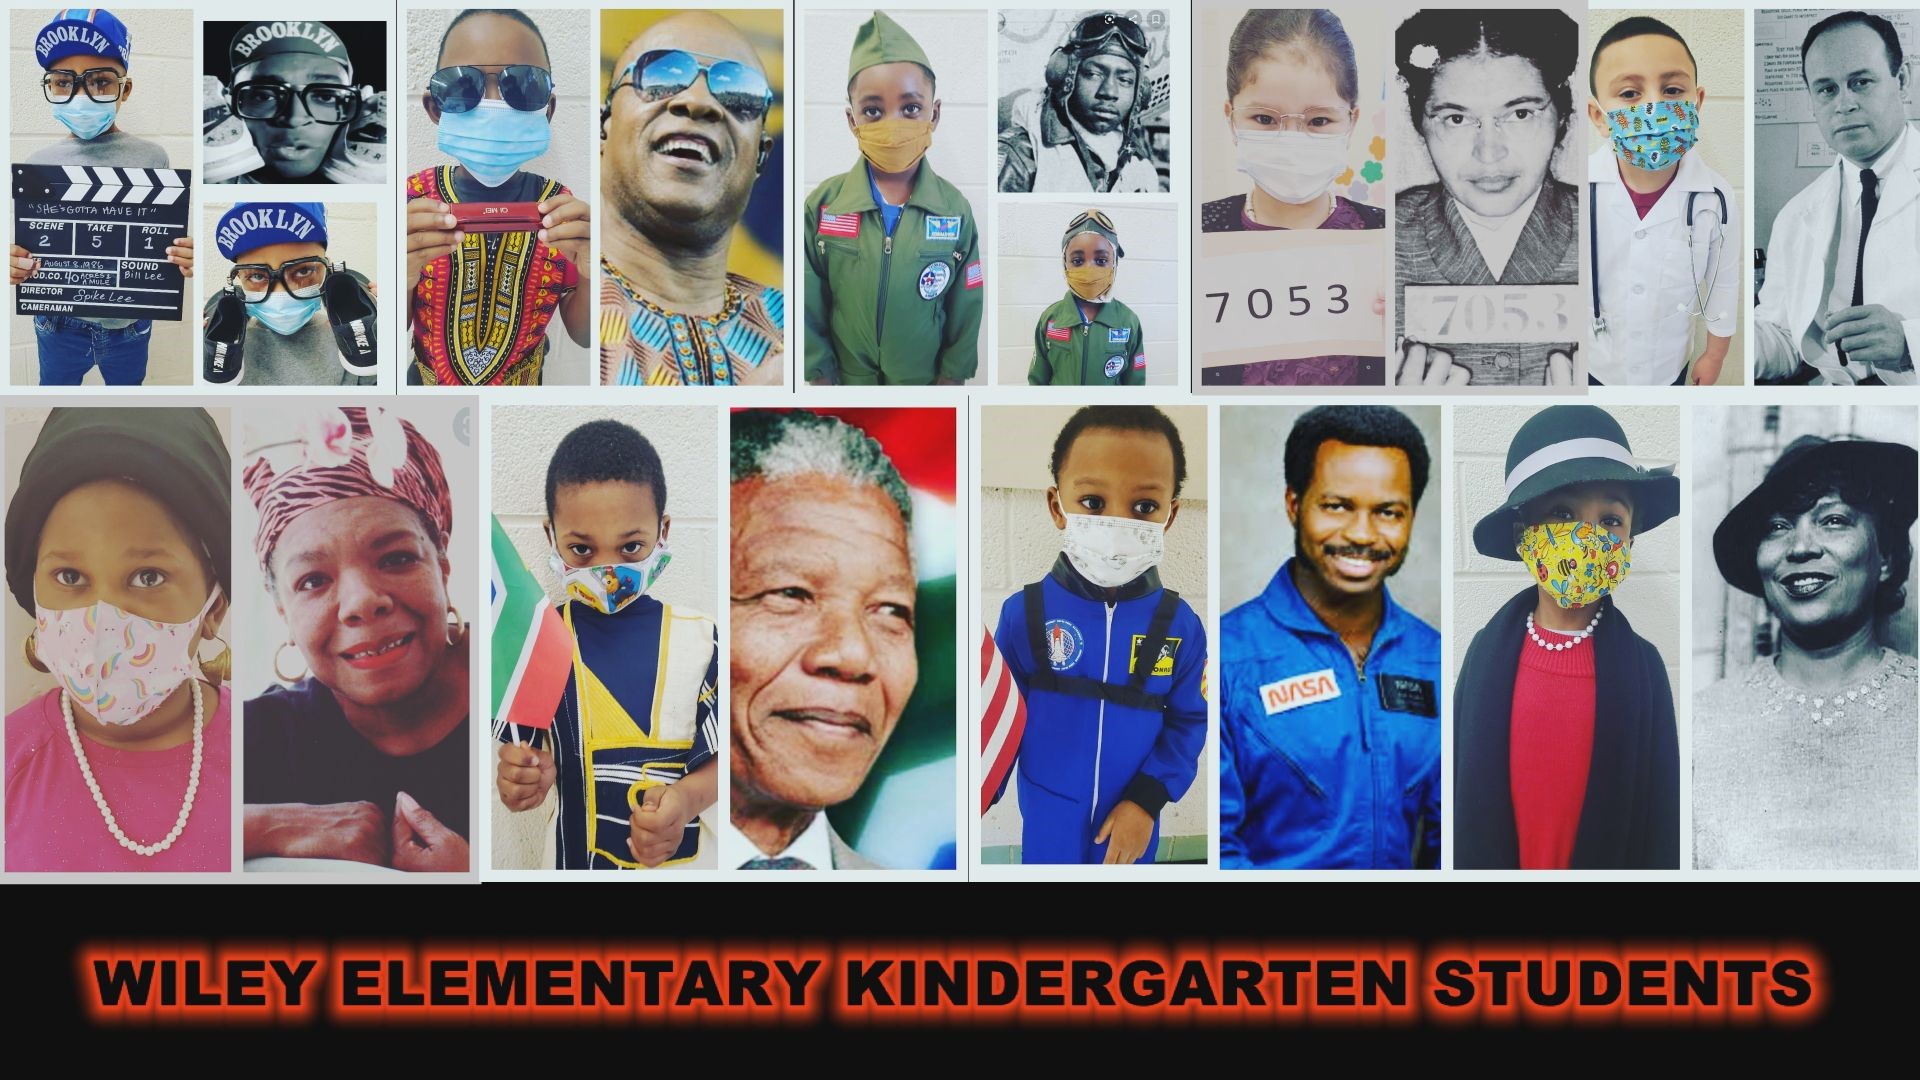 Wiley Elementary Kindergarten students are bringing Black legends to life for Black History Month.